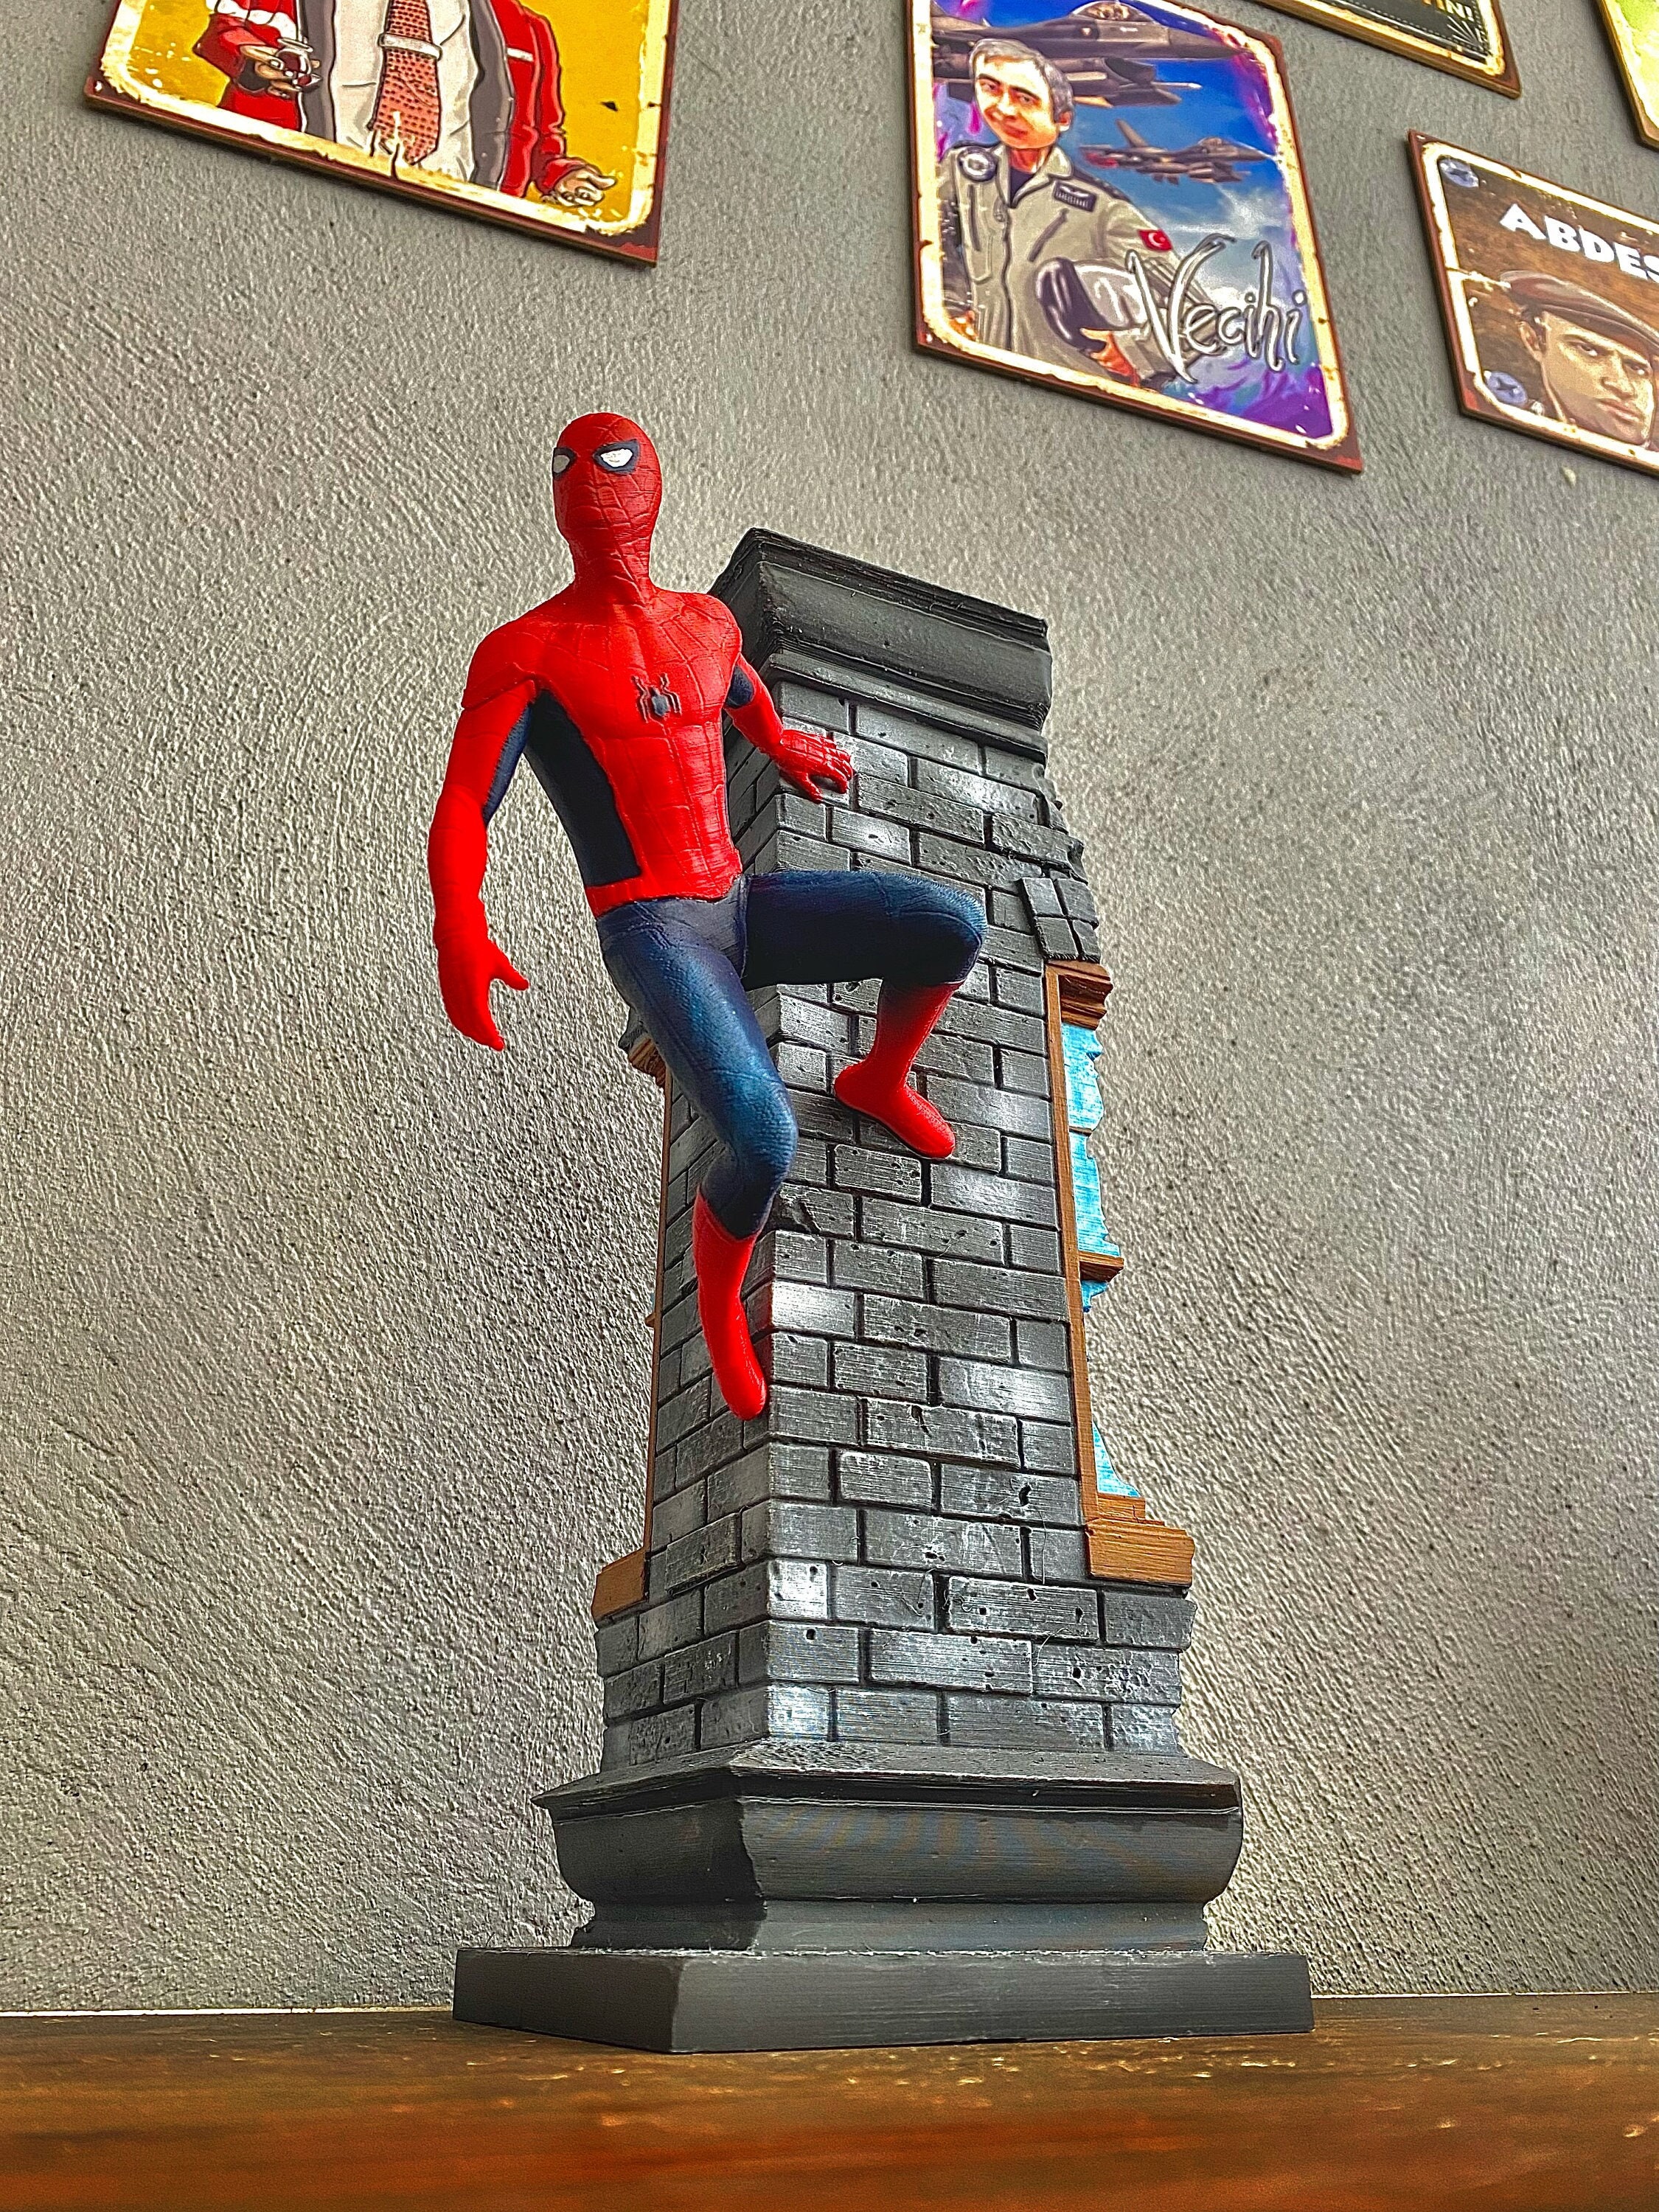 Spiderman VS Venom Marvel 3D Printed and Hand Painted Figure, Decor Gift  Statue 